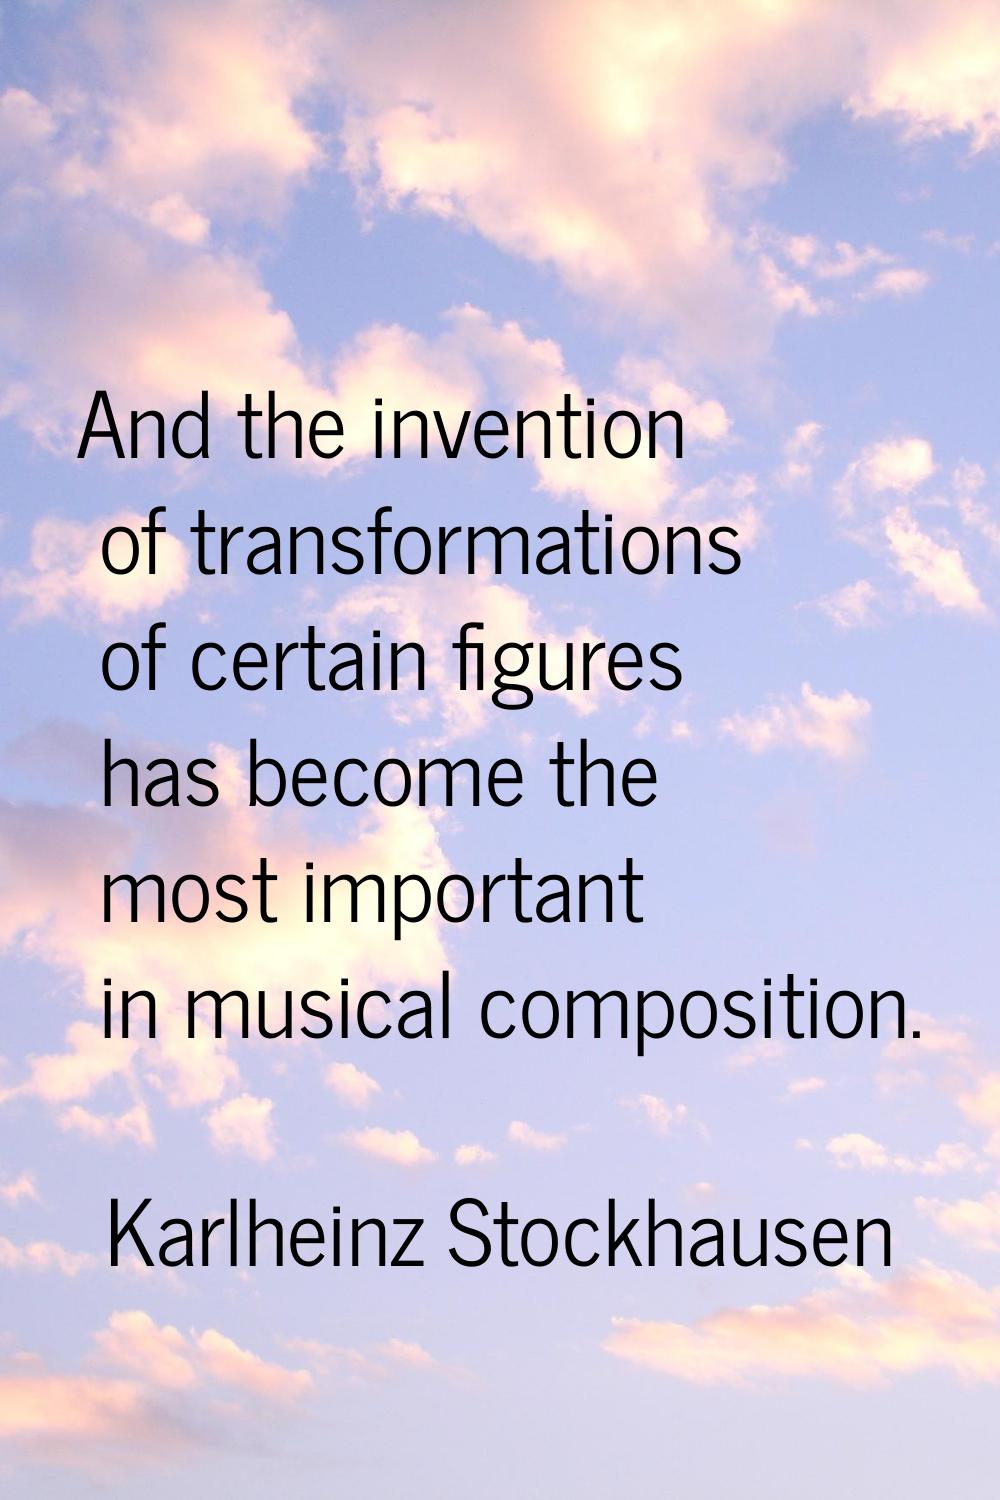 And the invention of transformations of certain figures has become the most important in musical co